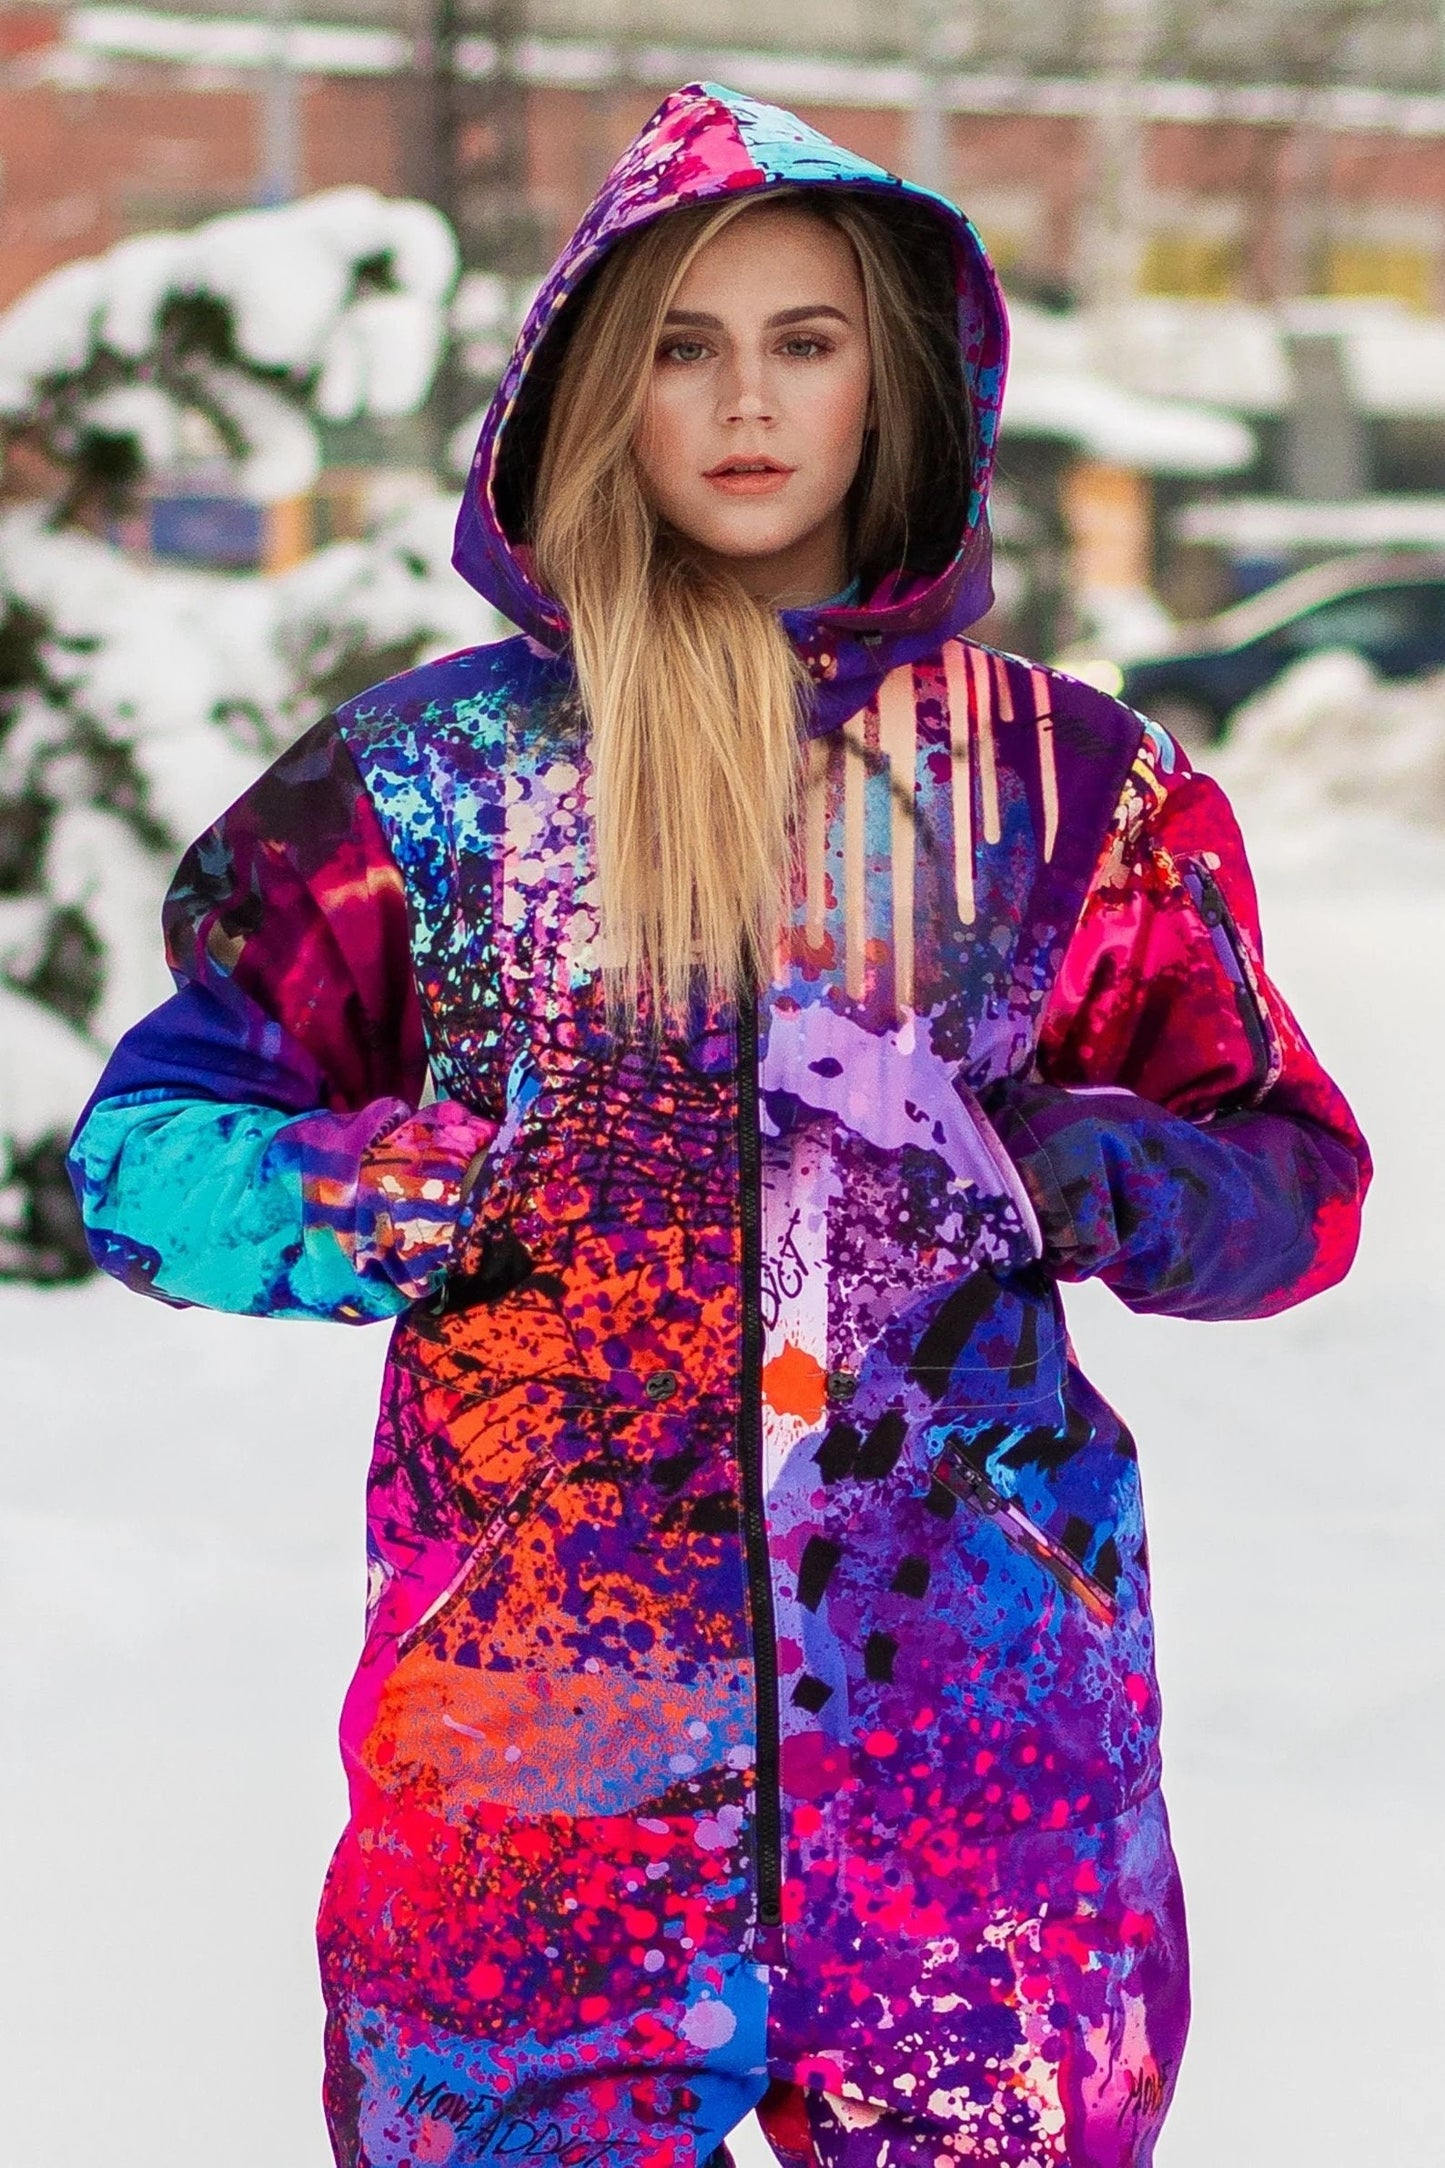 SET: Purple Winter Ski Jumpsuit, Snowboard Clothes, Snowboard suit, Skiing Overall, Women Mountain's clothes, Winter Thermal underwear